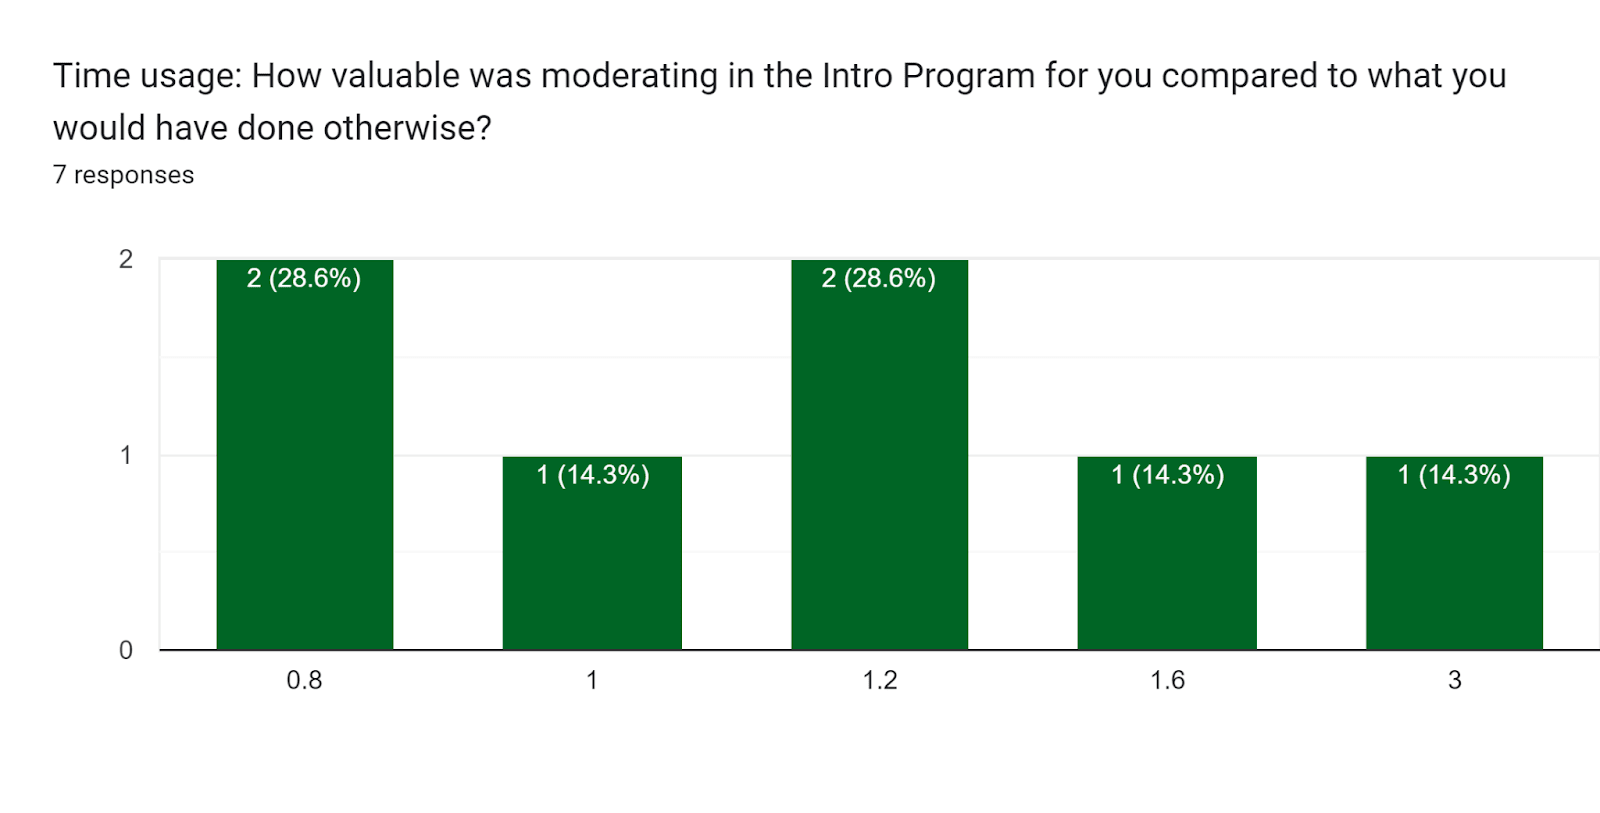 Forms response chart. Question title: Time usage: How valuable was moderating in the Intro Program for you compared to what you would have done otherwise?
. Number of responses: 7 responses.